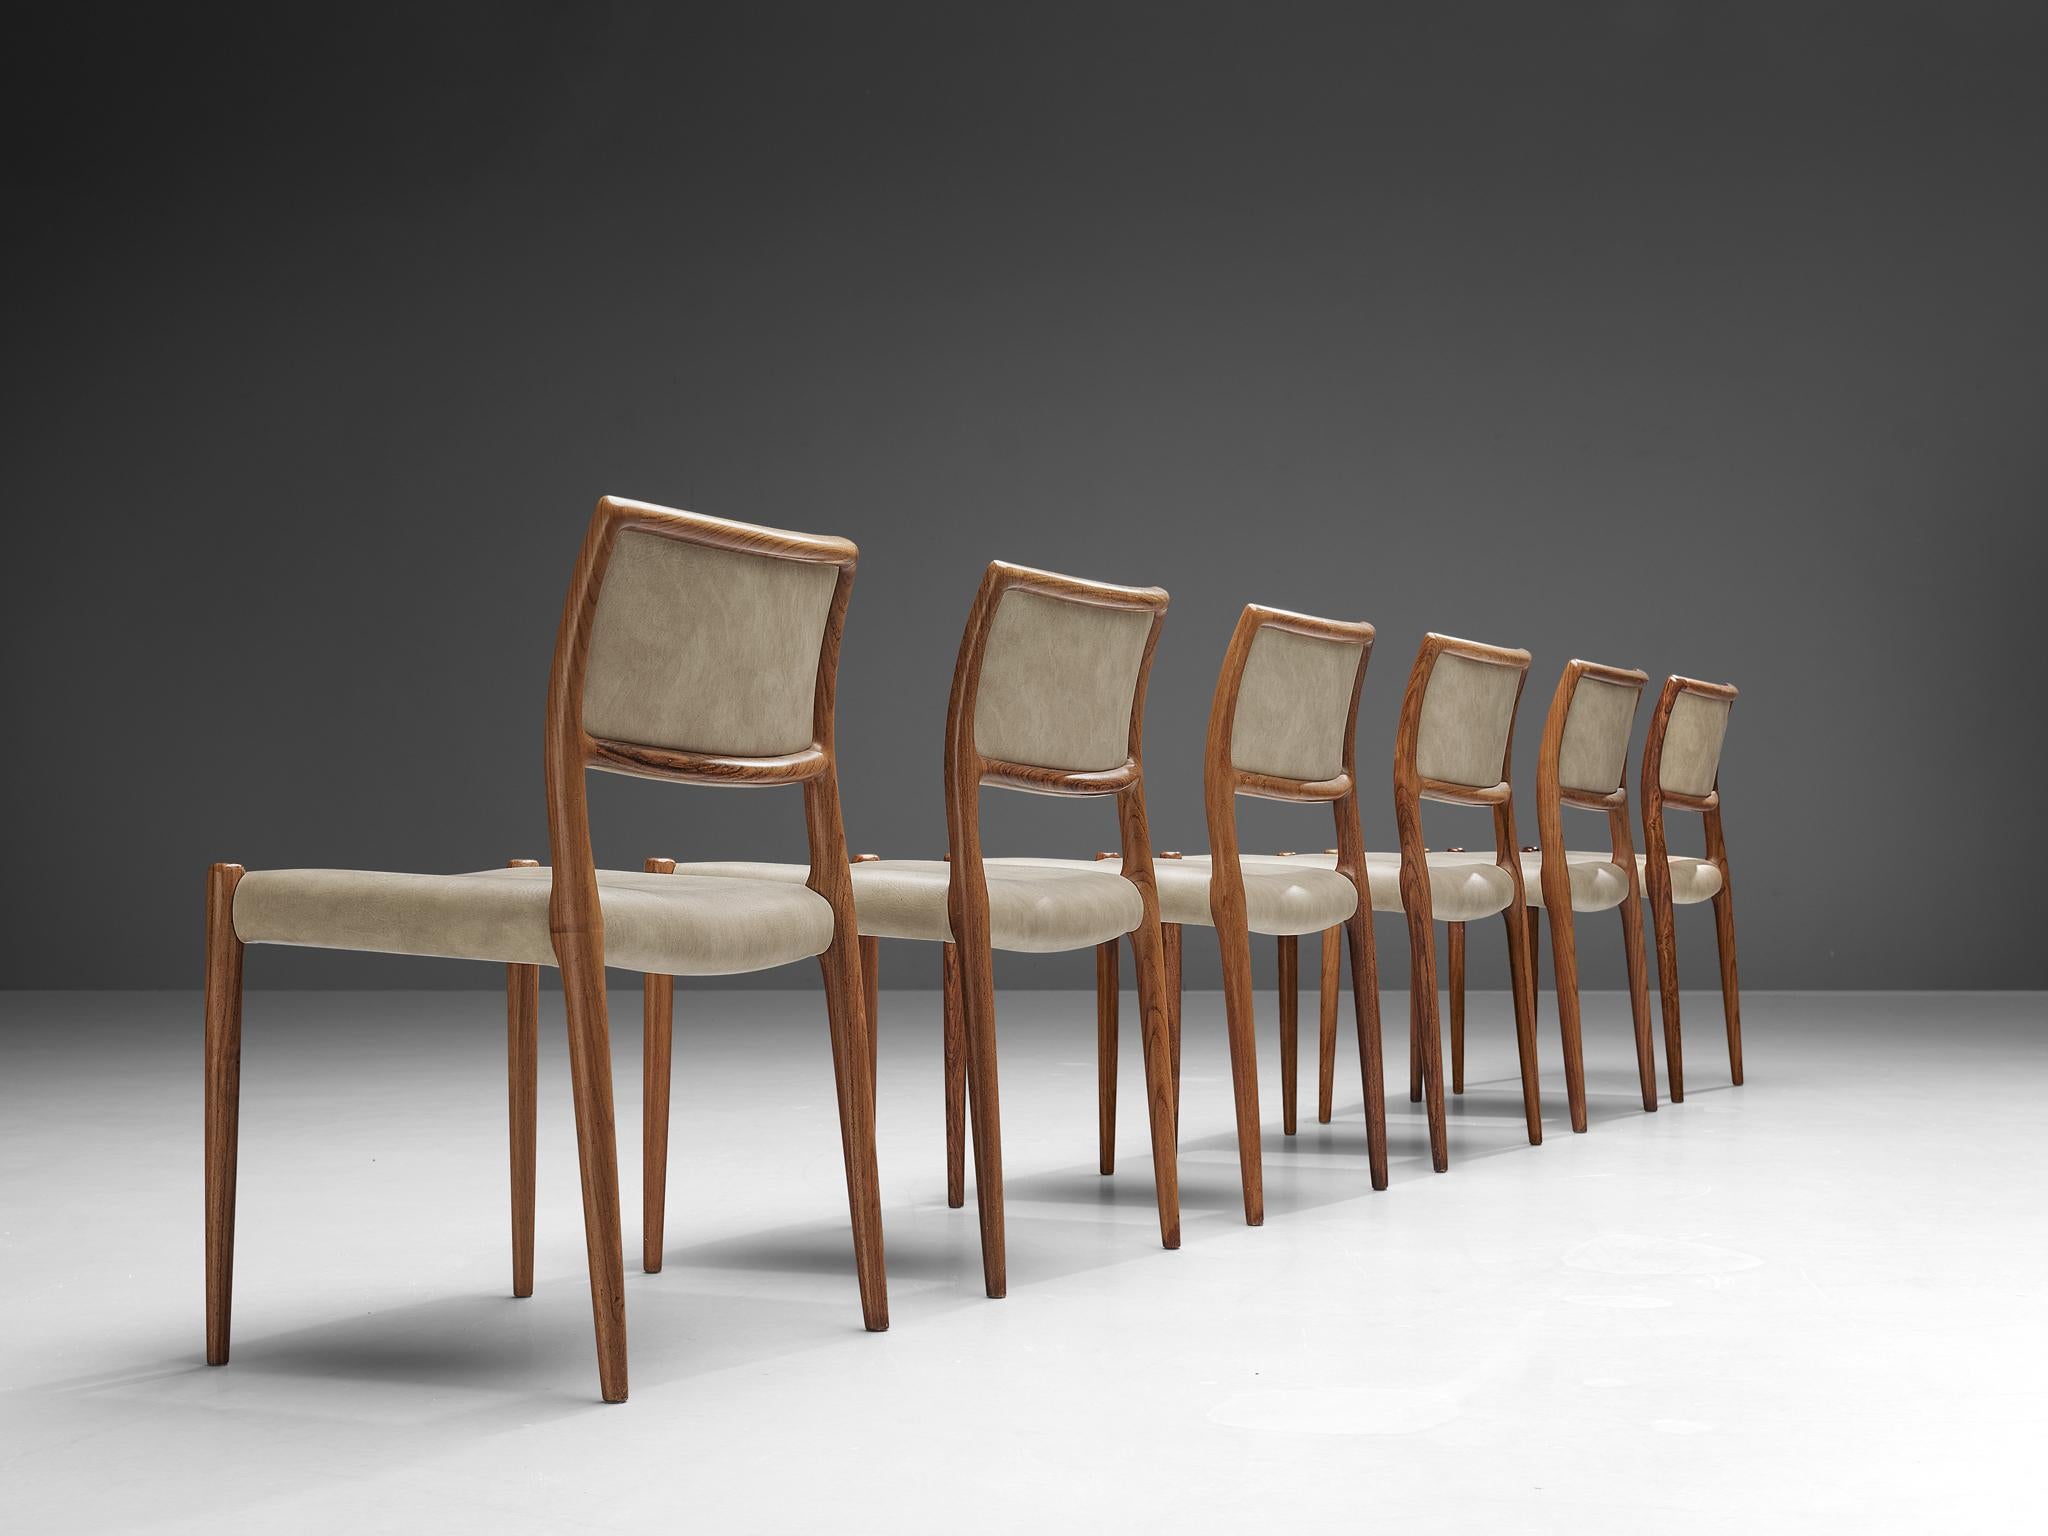 Niels Otto Møller for J.L. Mollers set of six dining chairs model 80, teak, leatherette, Denmark, 1960s

The model '80' by Niels Otto Møller in this case is upholstered in off-white leatherette that contrasts with the teak frame. The frame goes